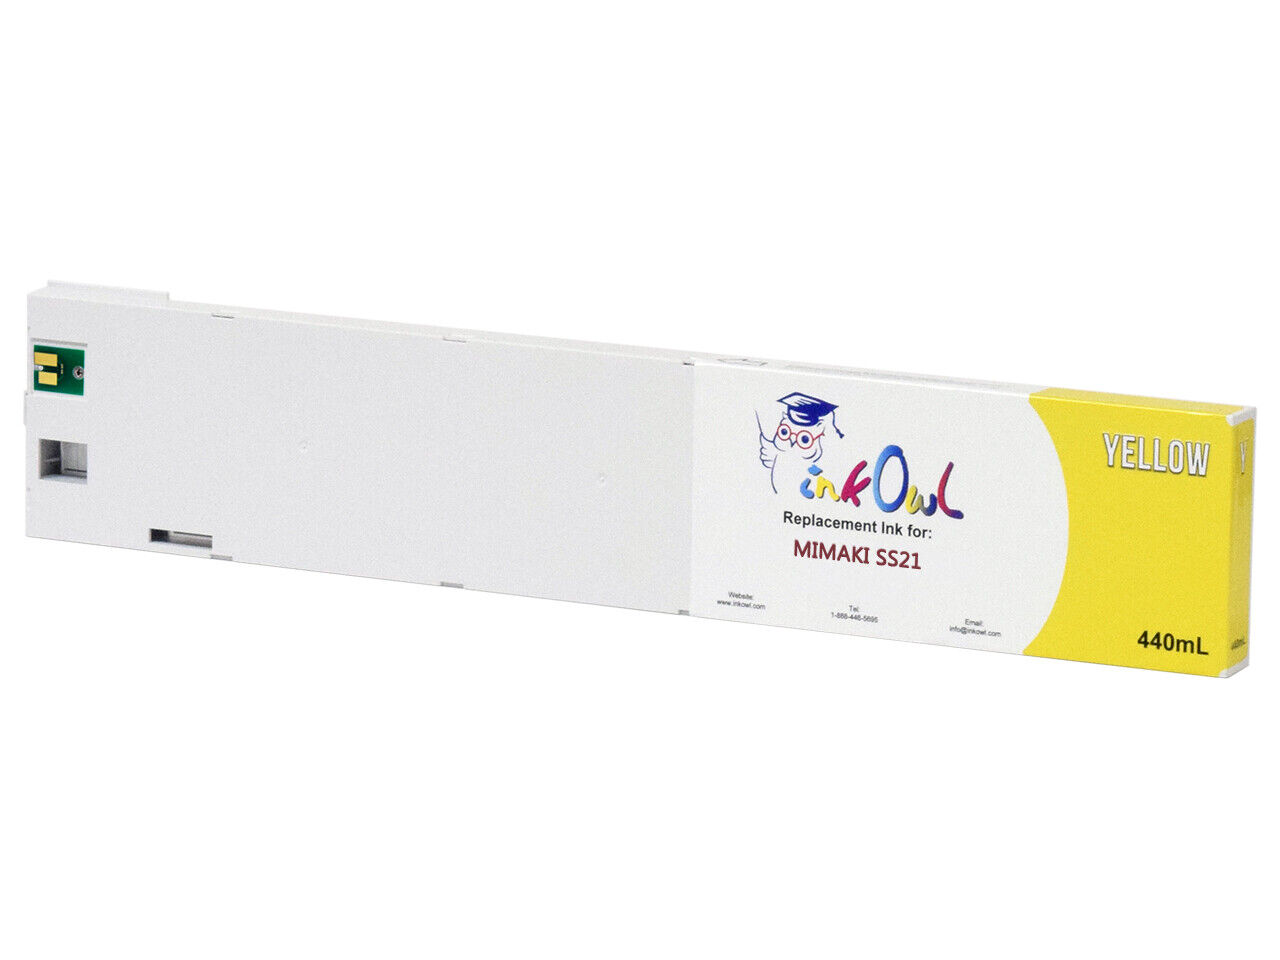 440ml InkOwl YELLOW Compatible Cartridge to replace Mimaki SS21 (SPC-0501Y)